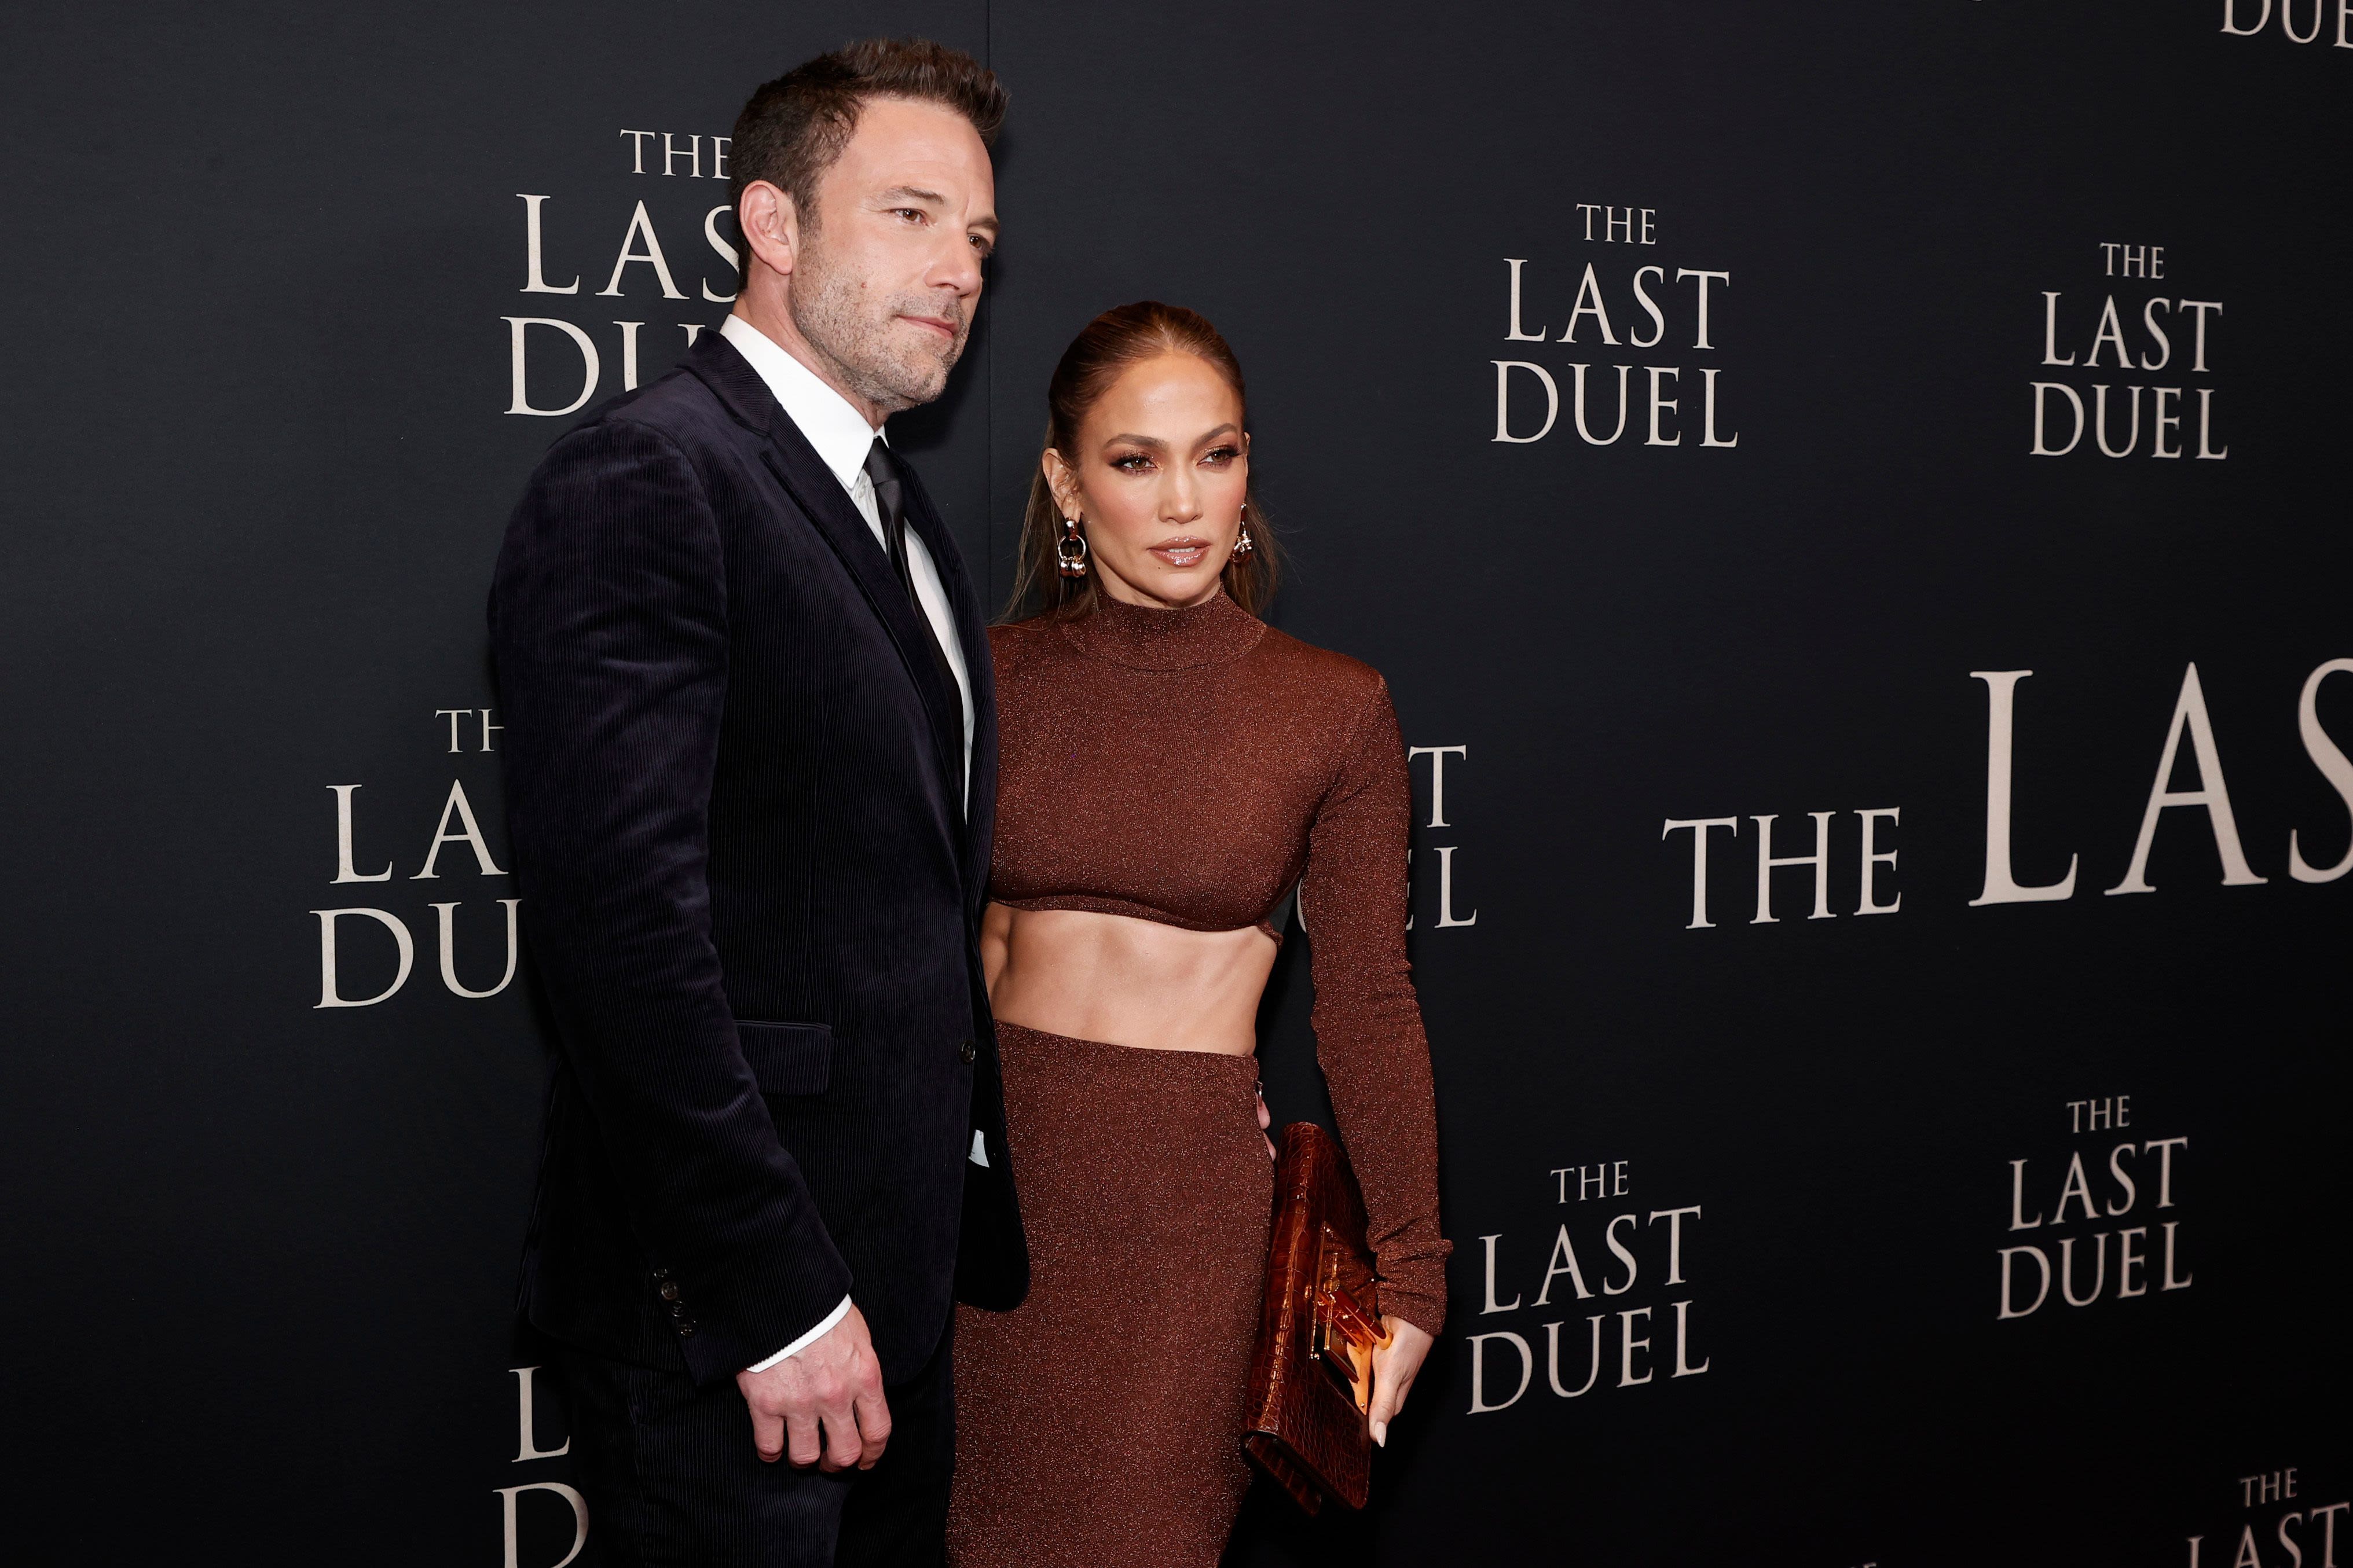 Jennifer Lopez and Ben Affleck’s Different Views of Love Led to Issues, Says Divorce Attorney